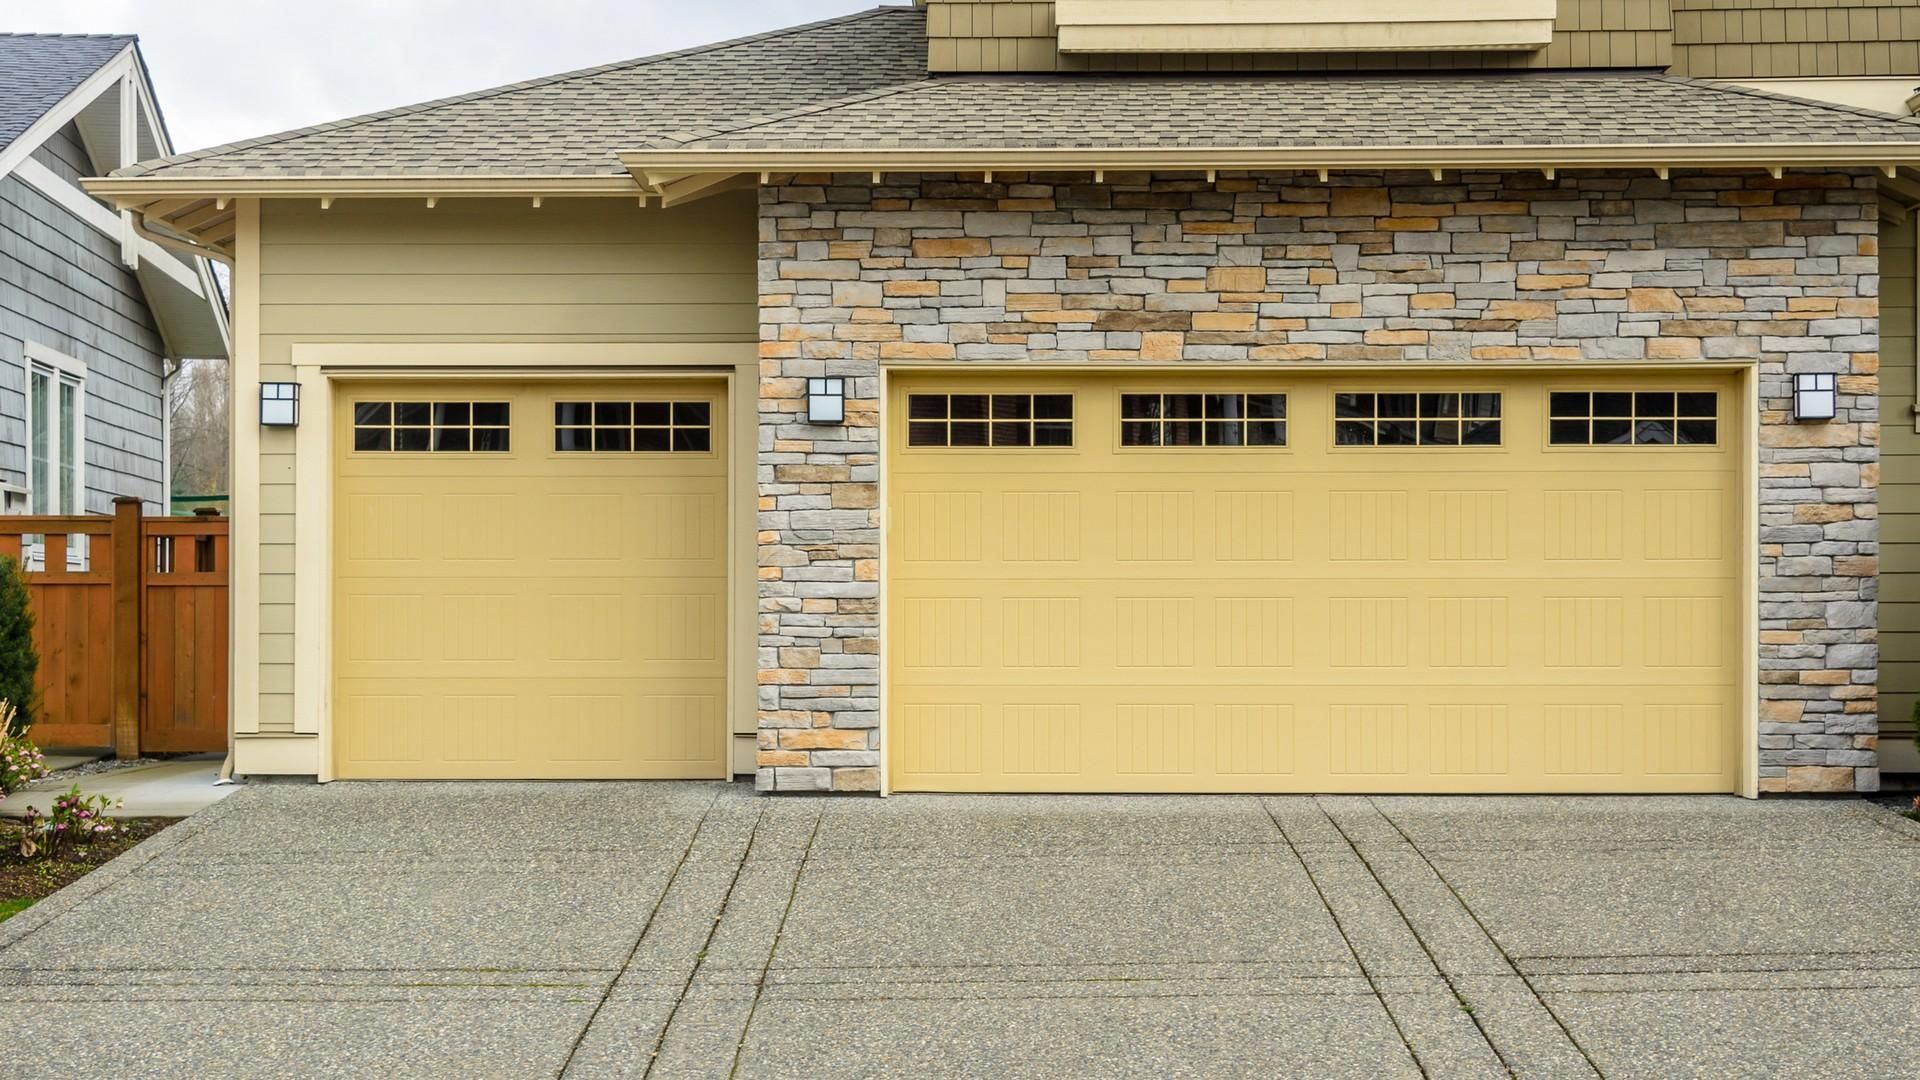 What is the common garage door repair service offered by professionals?